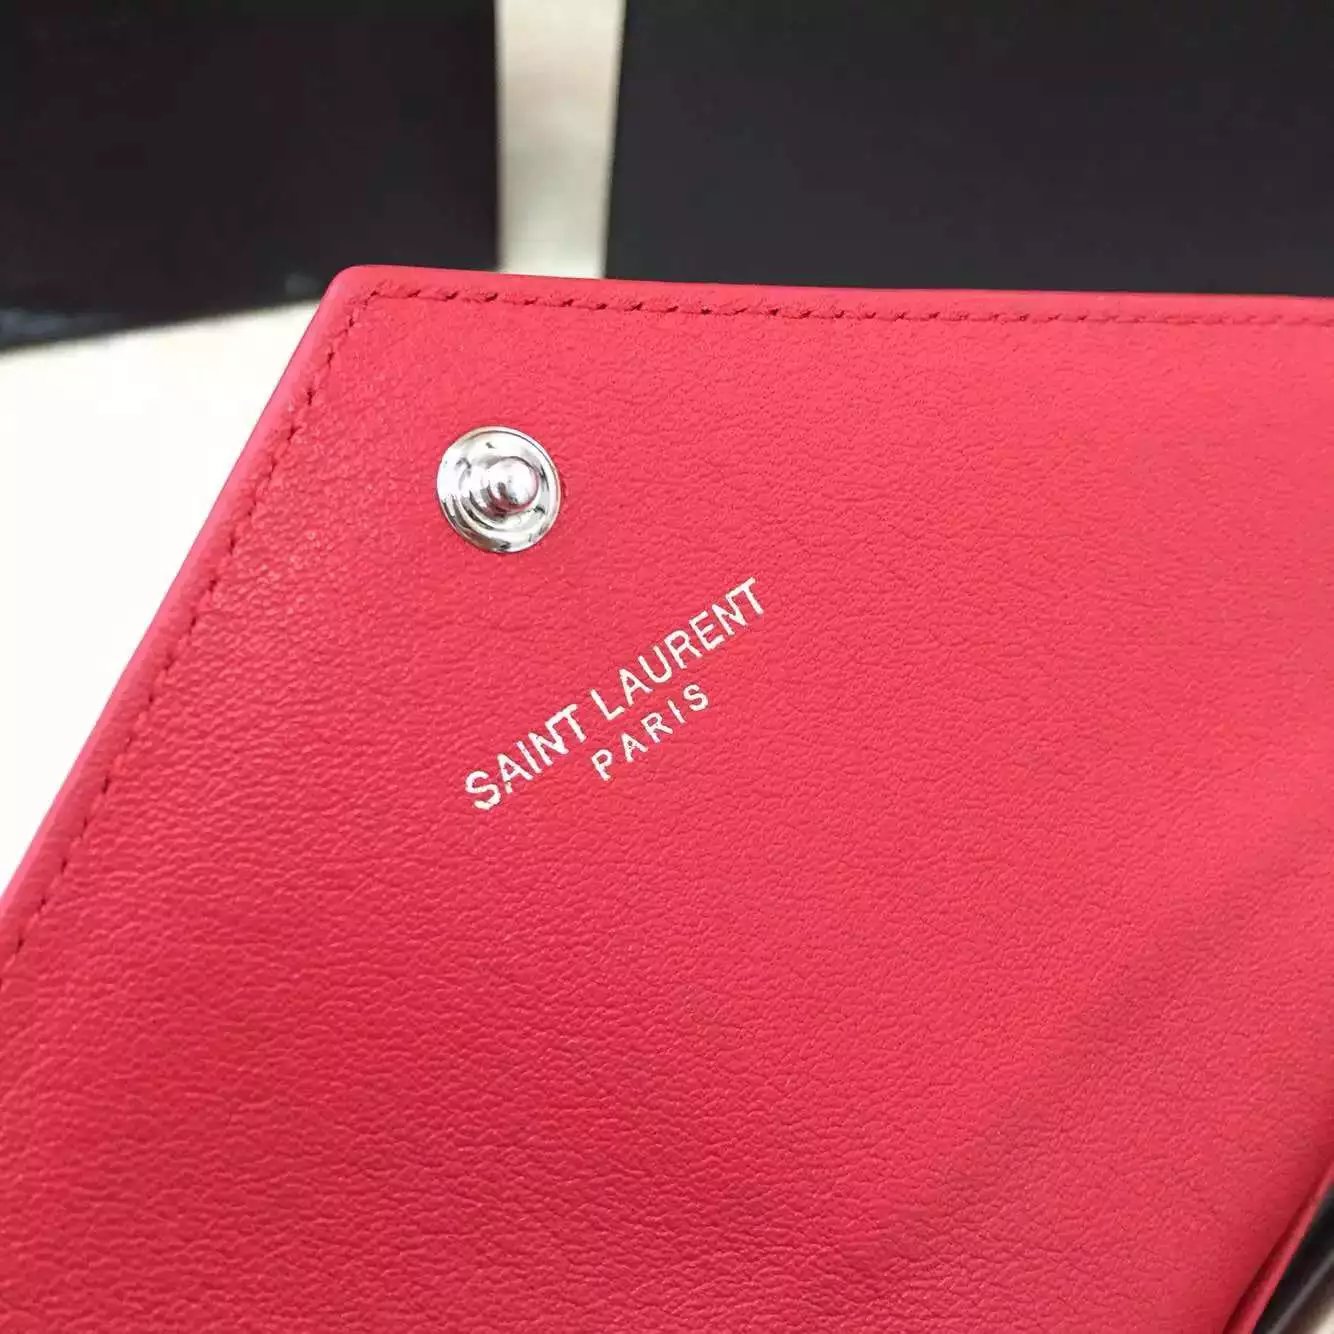 Limited Edition!2016 New Saint Laurent Bag Cheap Sale-Saint Laurent Trio Bag in Red Calfskin Leather - Click Image to Close